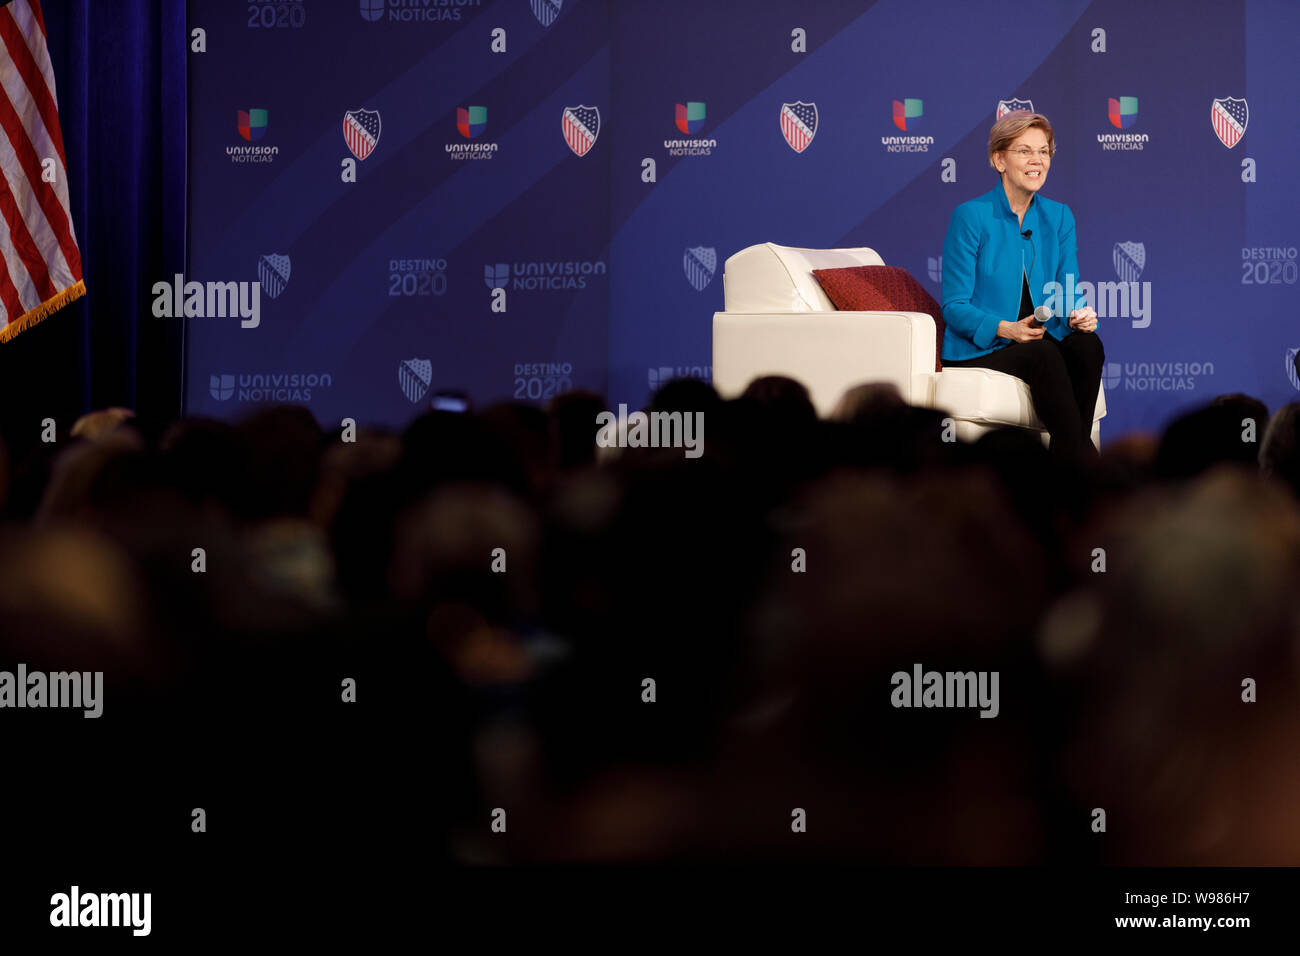 Senator Elizabeth Warren, a Democrat from Massachusetts and 2020 presidential candidate, speaks to the crowd during an event Stock Photo